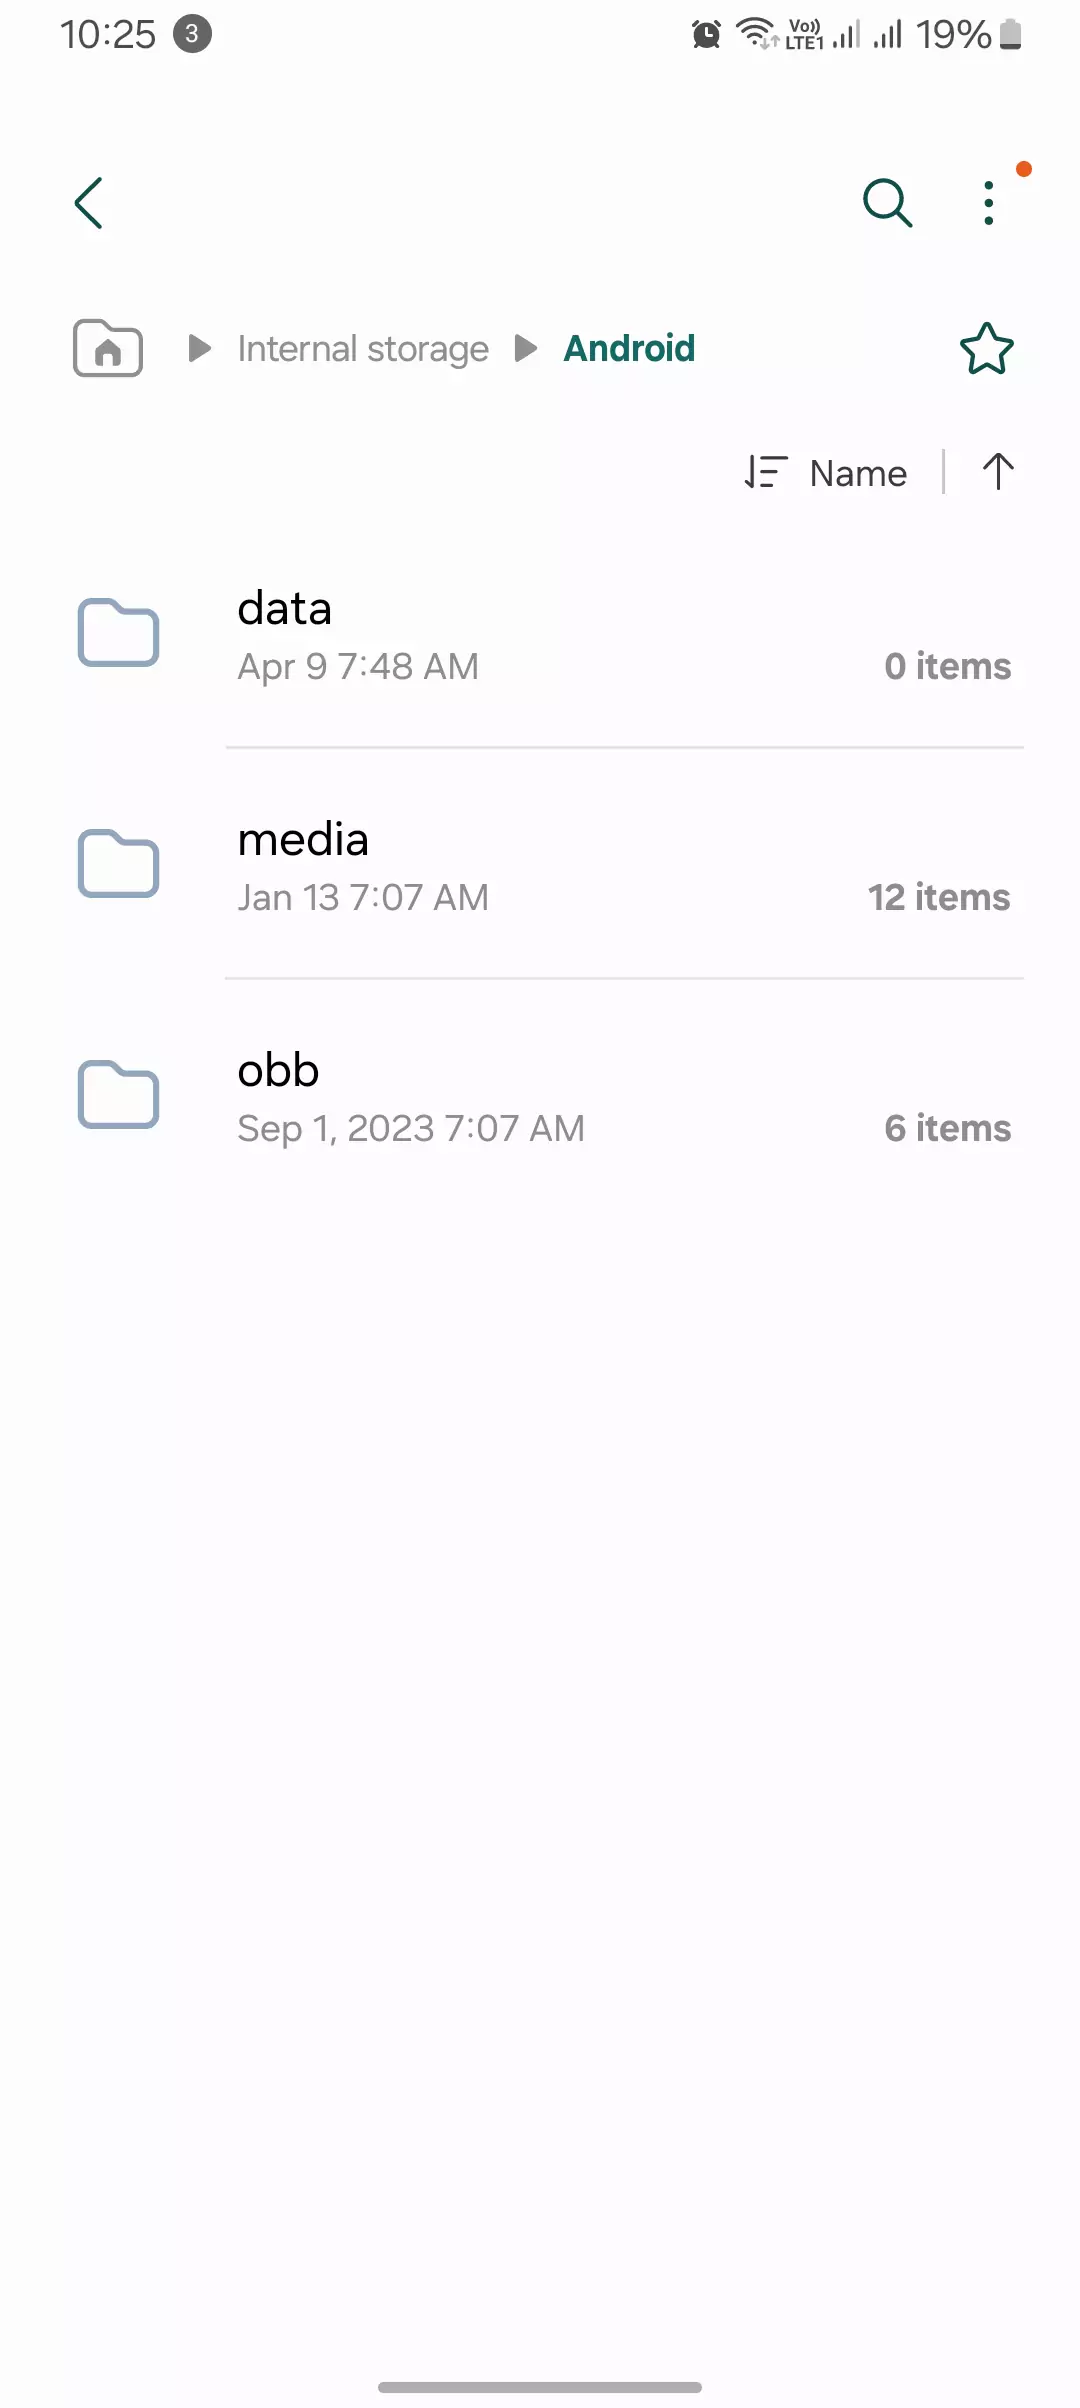 android folder opened on android screenshot